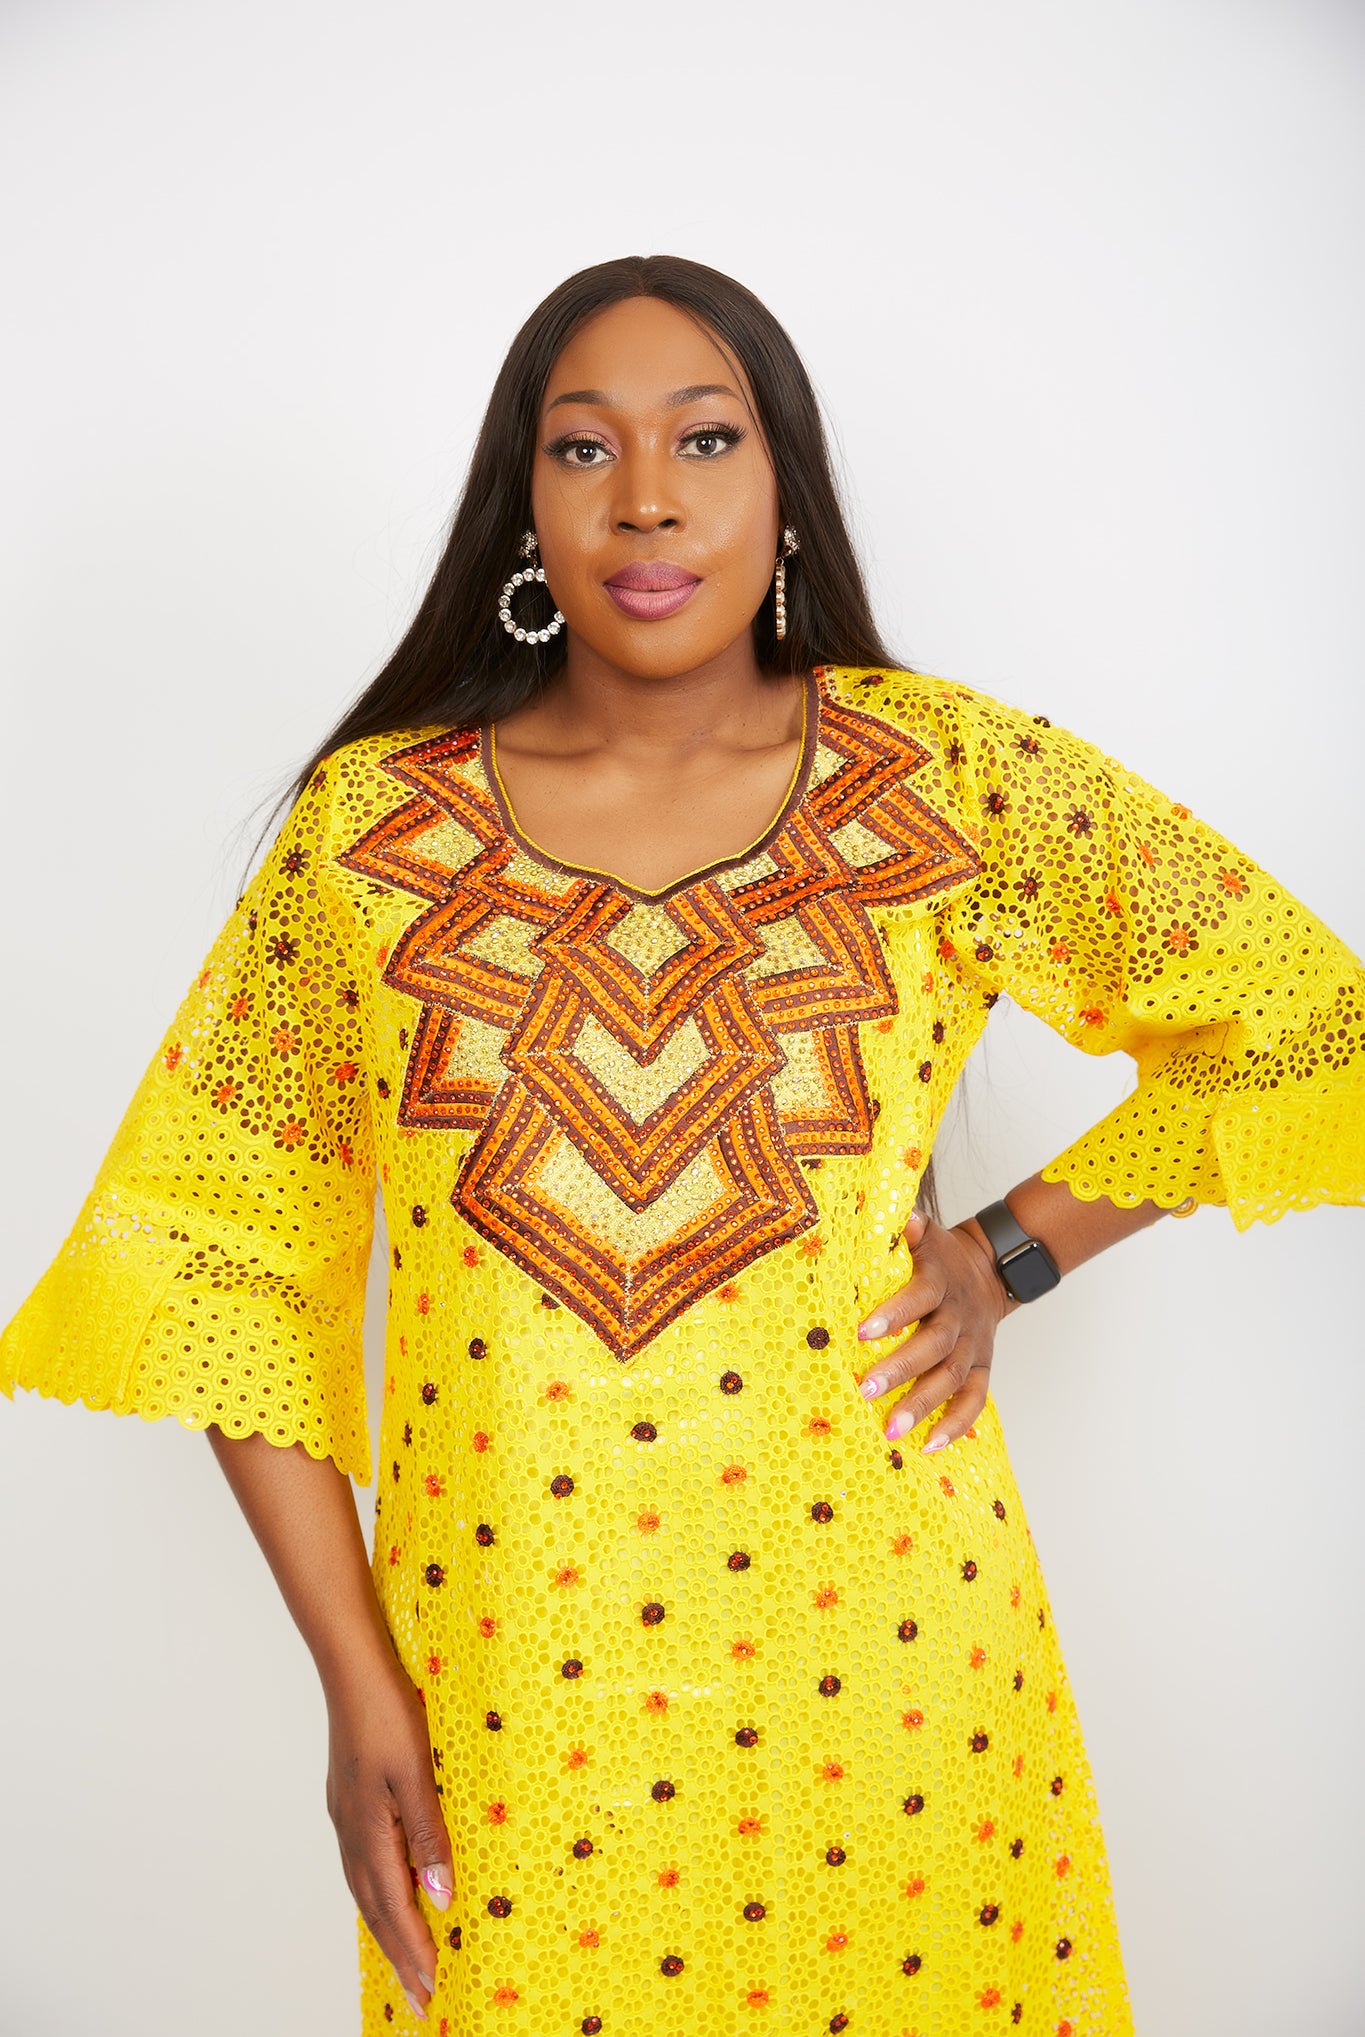 African kaftan | African bubu | African boubou | African Maxi dresses | African occasion  dresses | Dresses for African events 